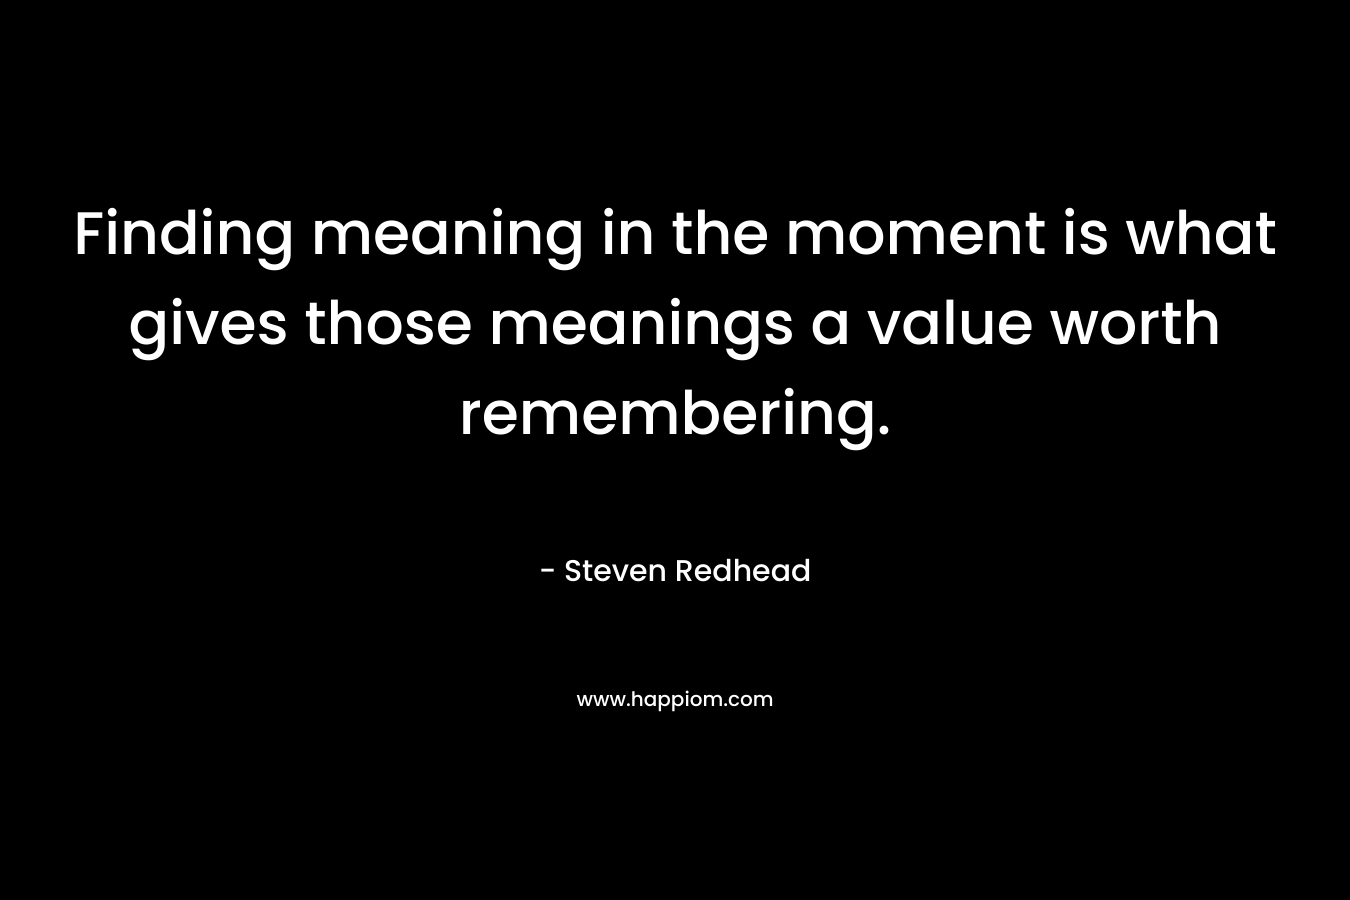 Finding meaning in the moment is what gives those meanings a value worth remembering.